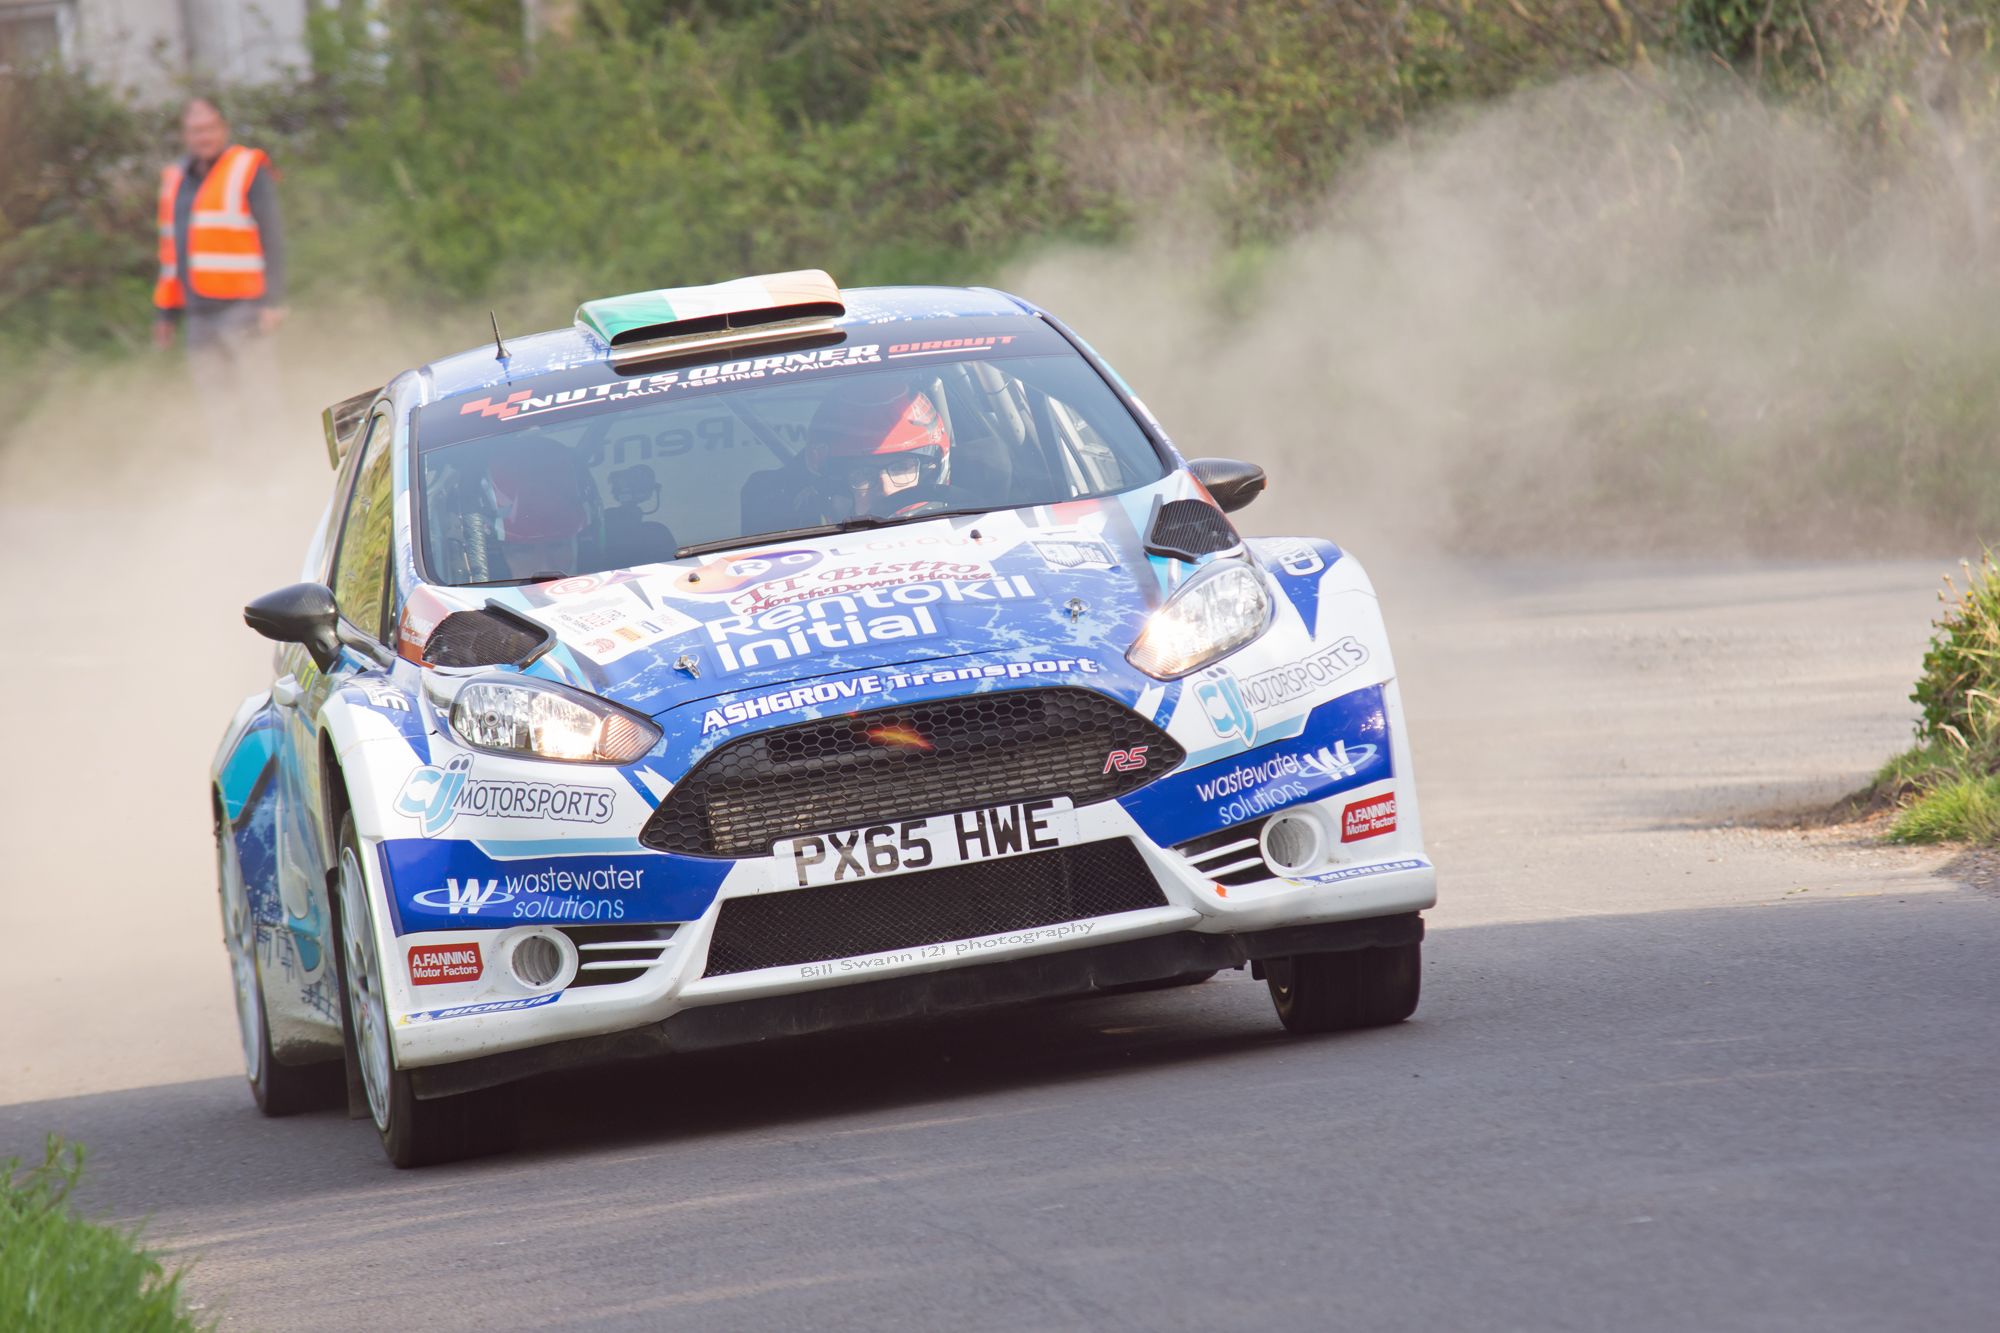 NUMBER ONE: Craig Breen is a past winner of the demanding Ypres Rally